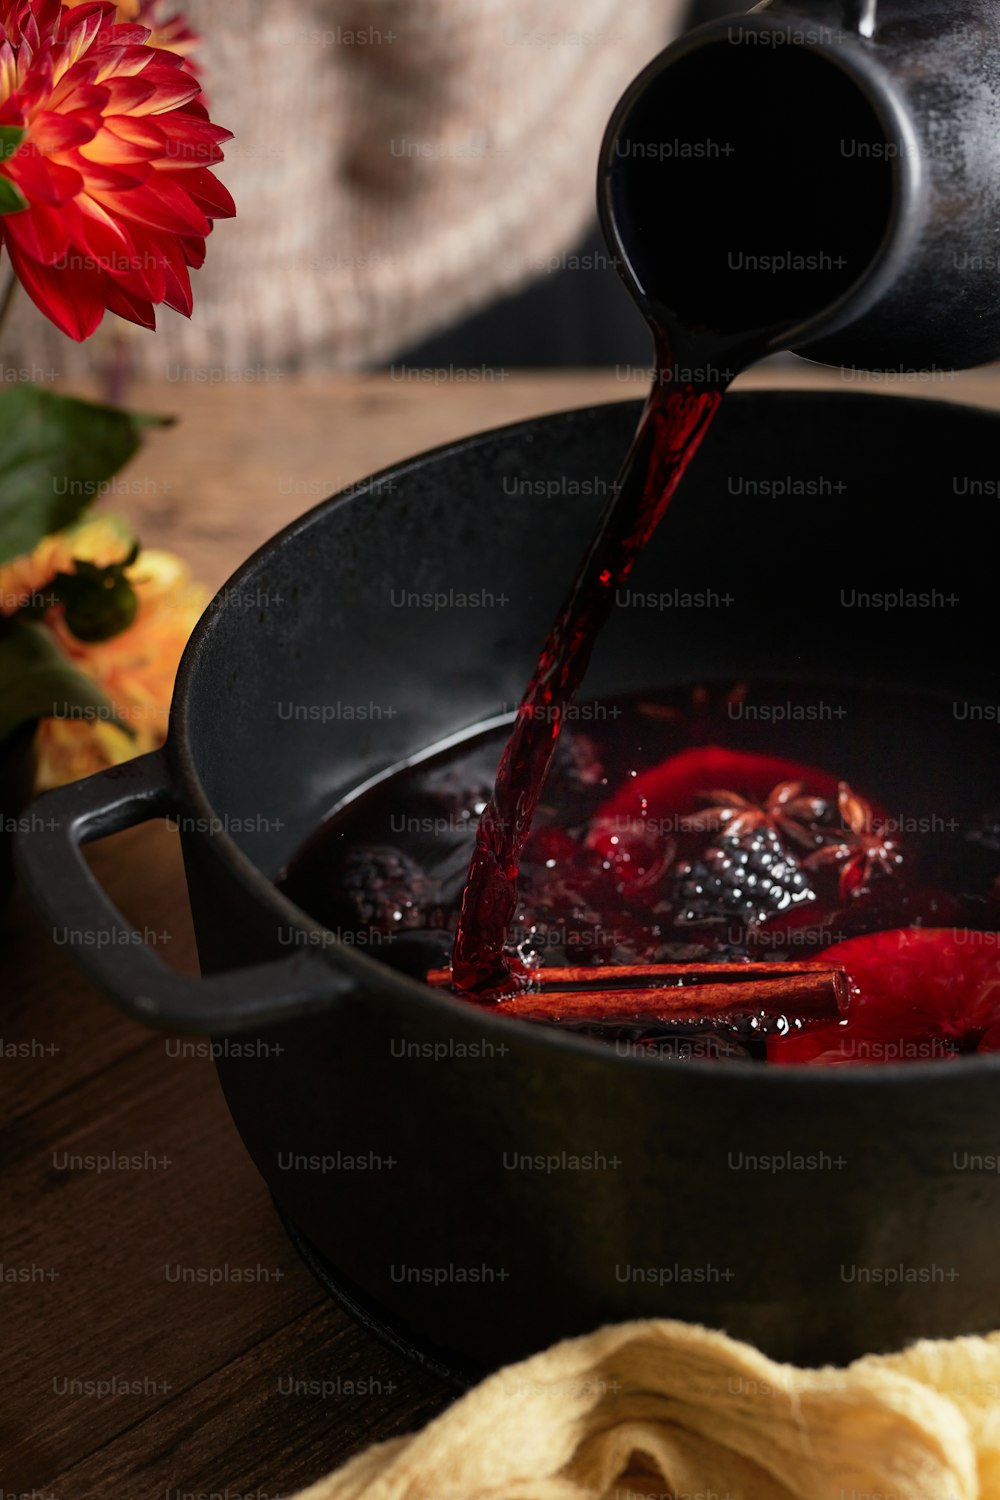 a pot filled with liquid being poured into it